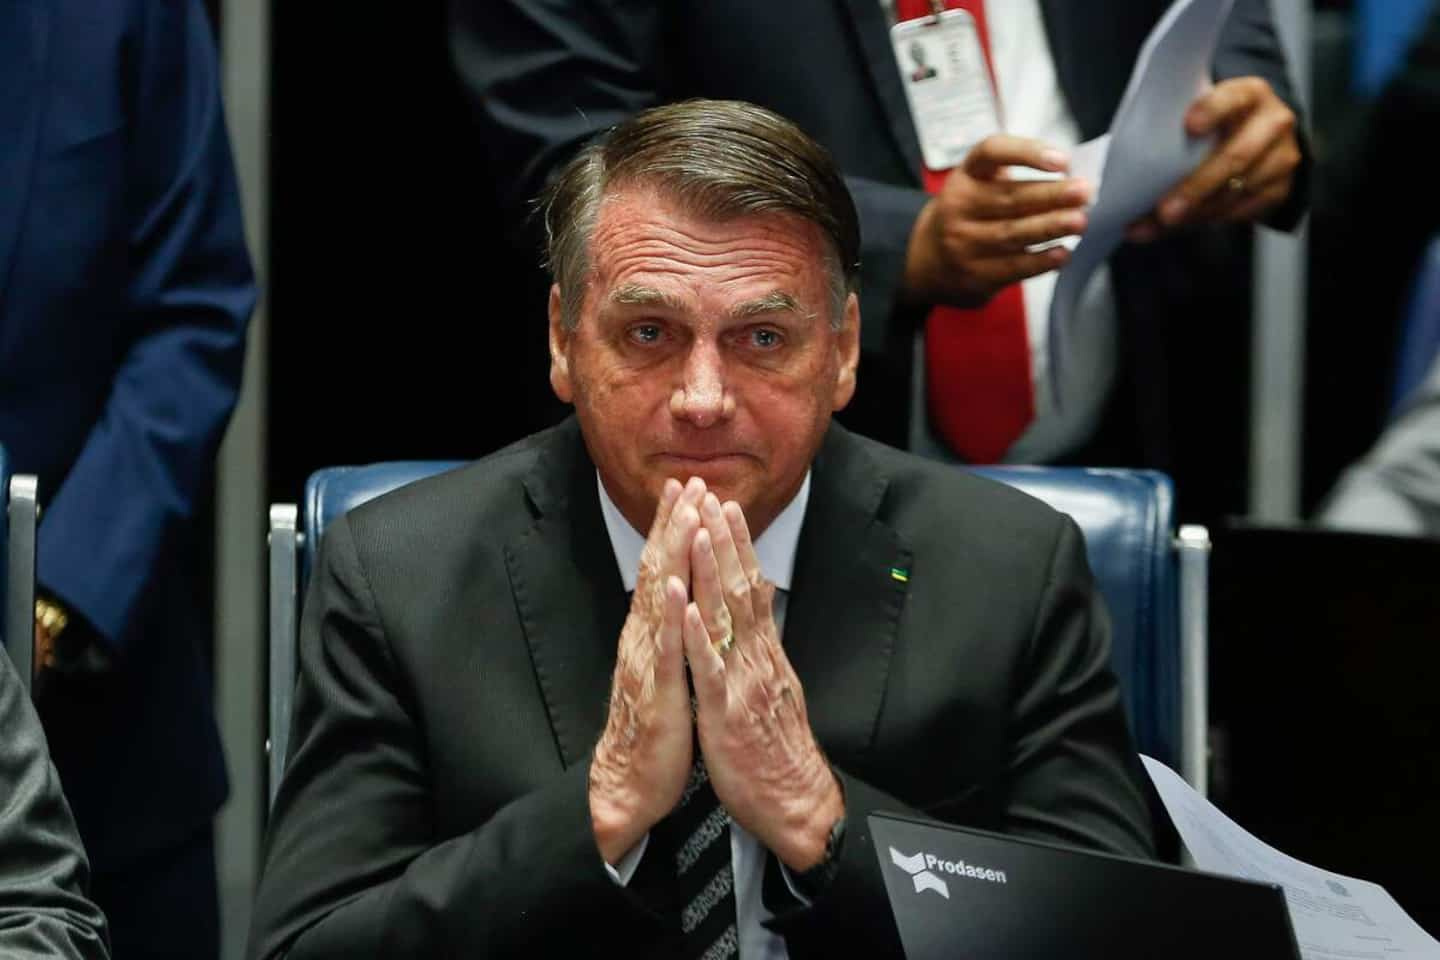 In front of ambassadors, Bolsonaro questions the electoral system